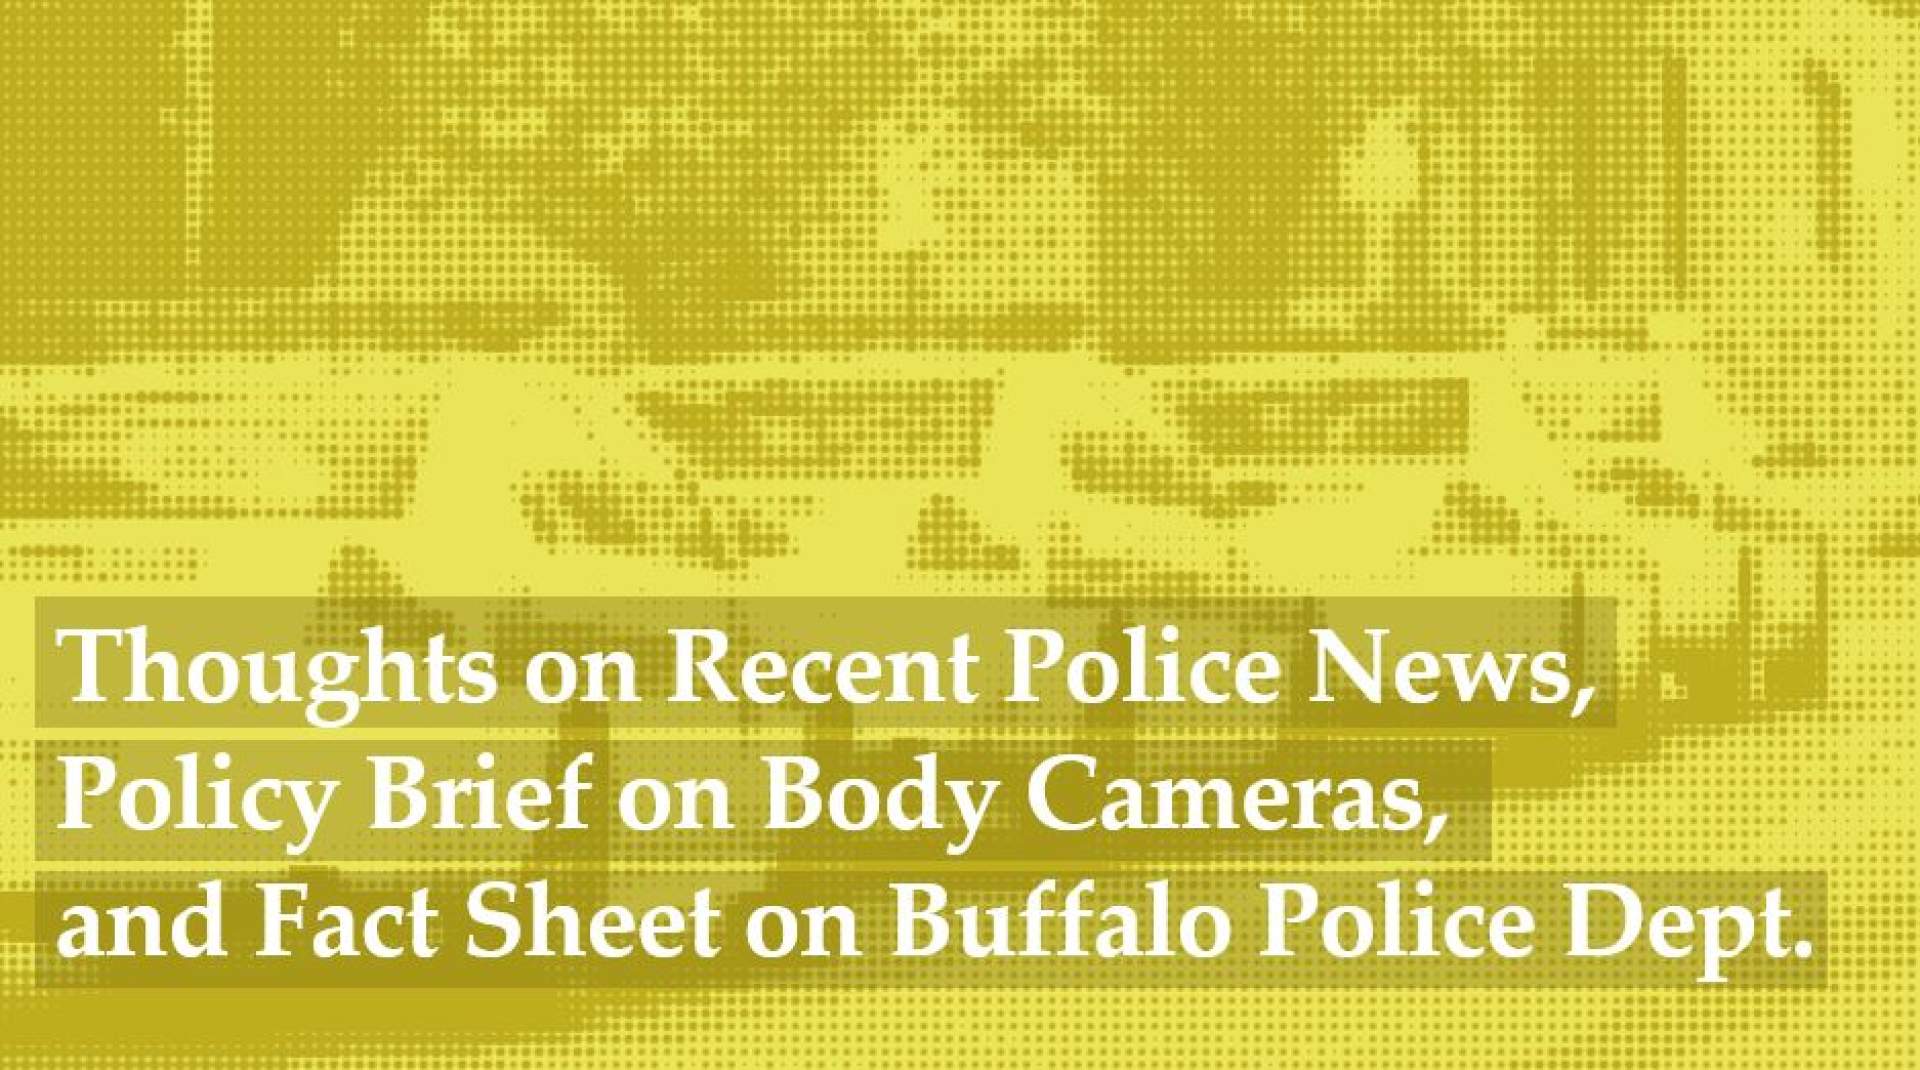 Thoughts on Recent Police News, Policy Brief on Body Cameras, and Fact Sheet on Buffalo Police